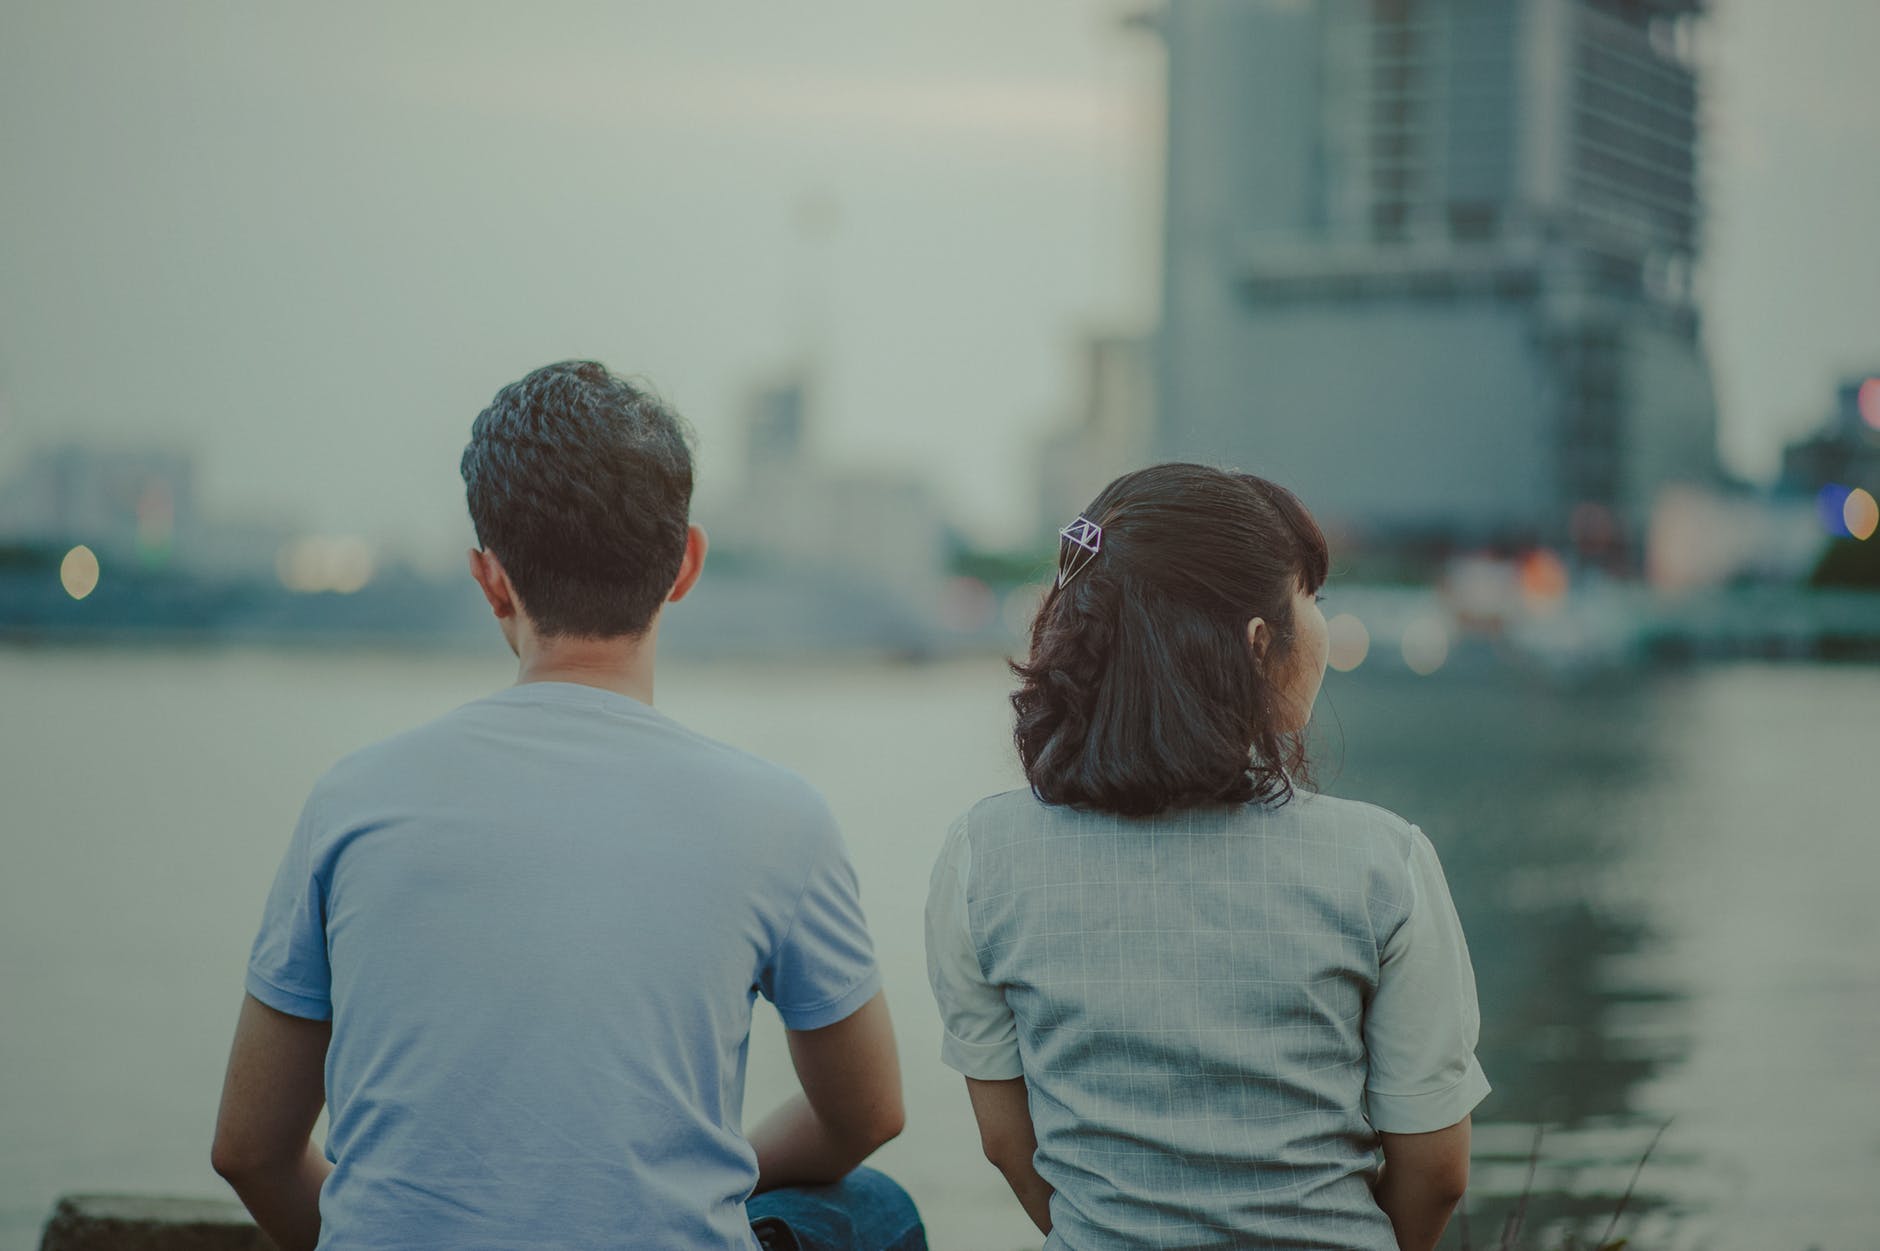 Selective Focus Photography of Man and Woman Watching Body of Water and Concrete Buildings, Selective Focus Photography of Man and Woman Watching Body of Water and Concrete Buildings